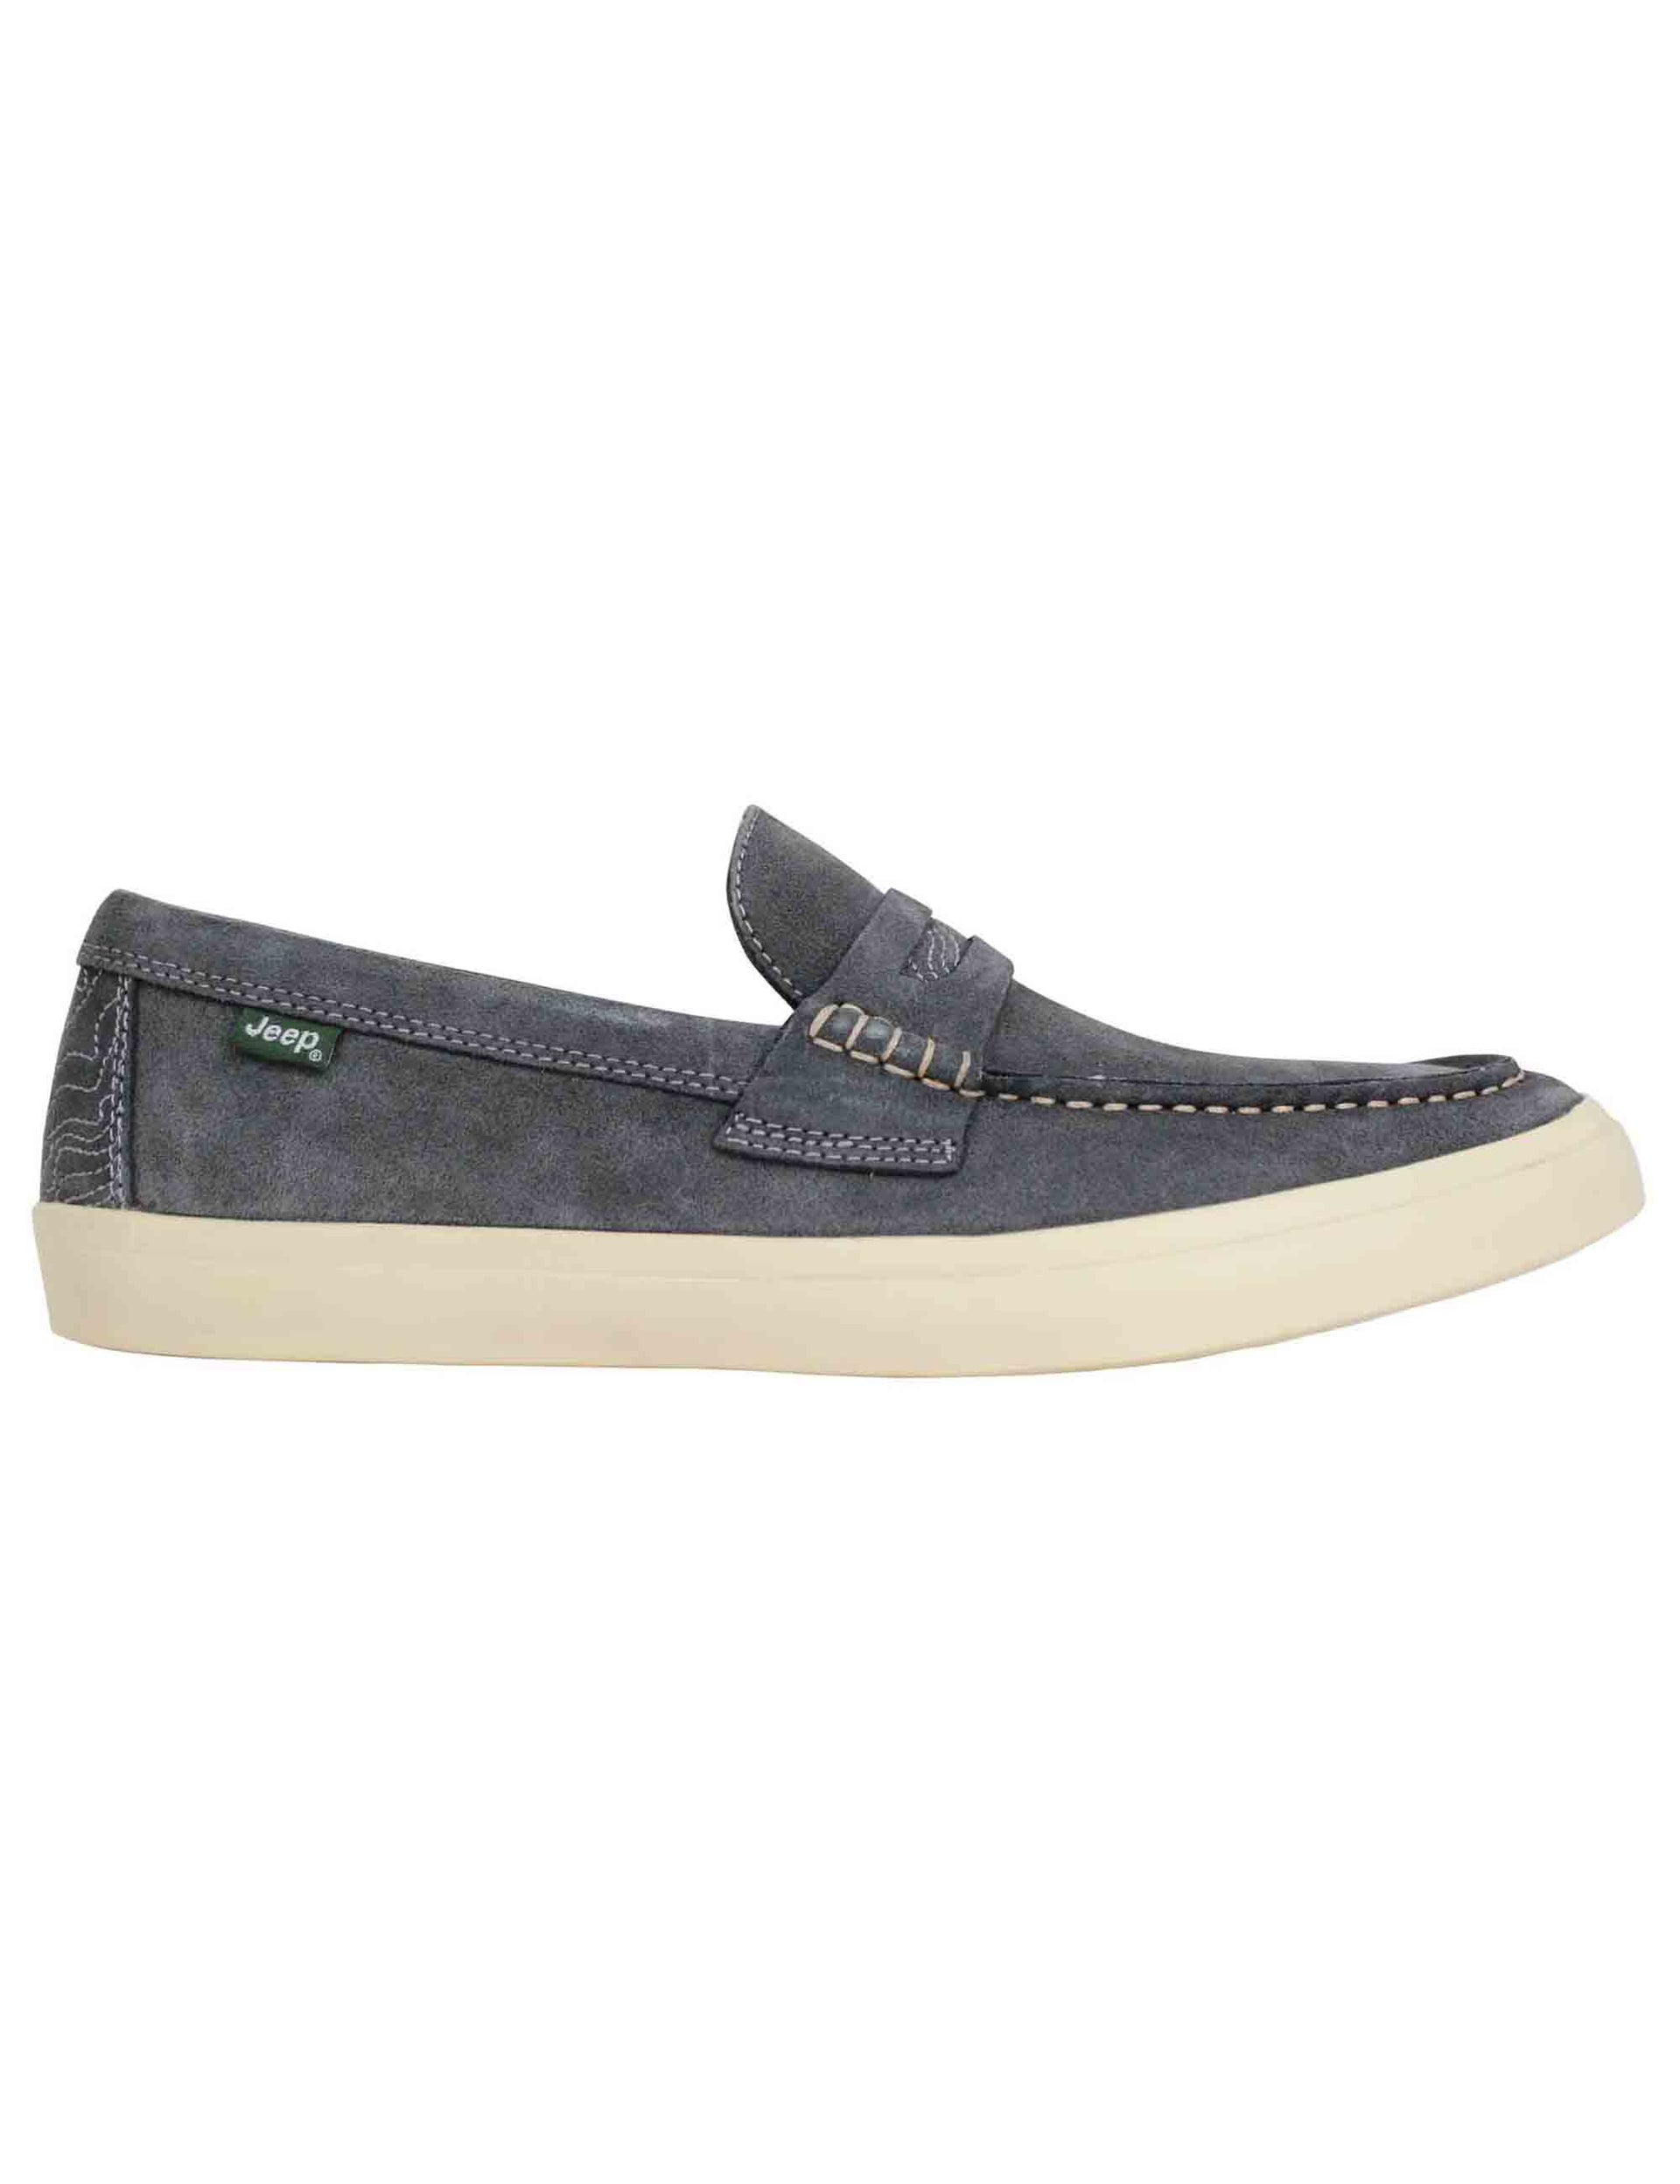 Moki Suede men's loafers in gray suede with white rubber sole